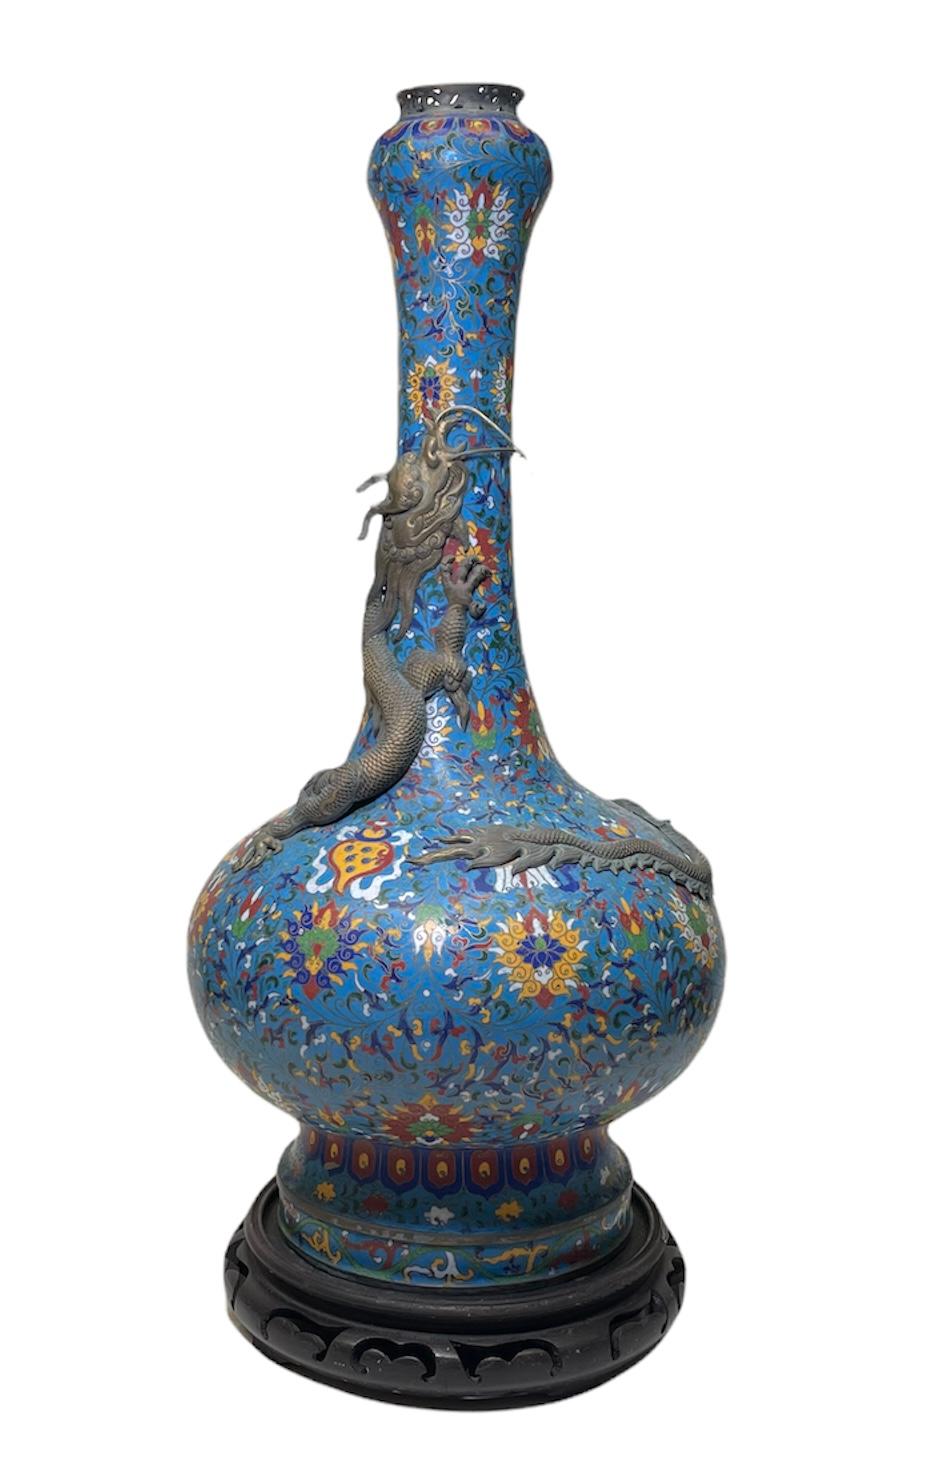 Rare Chinese Large and Long Cloisonné Urn Vase 6